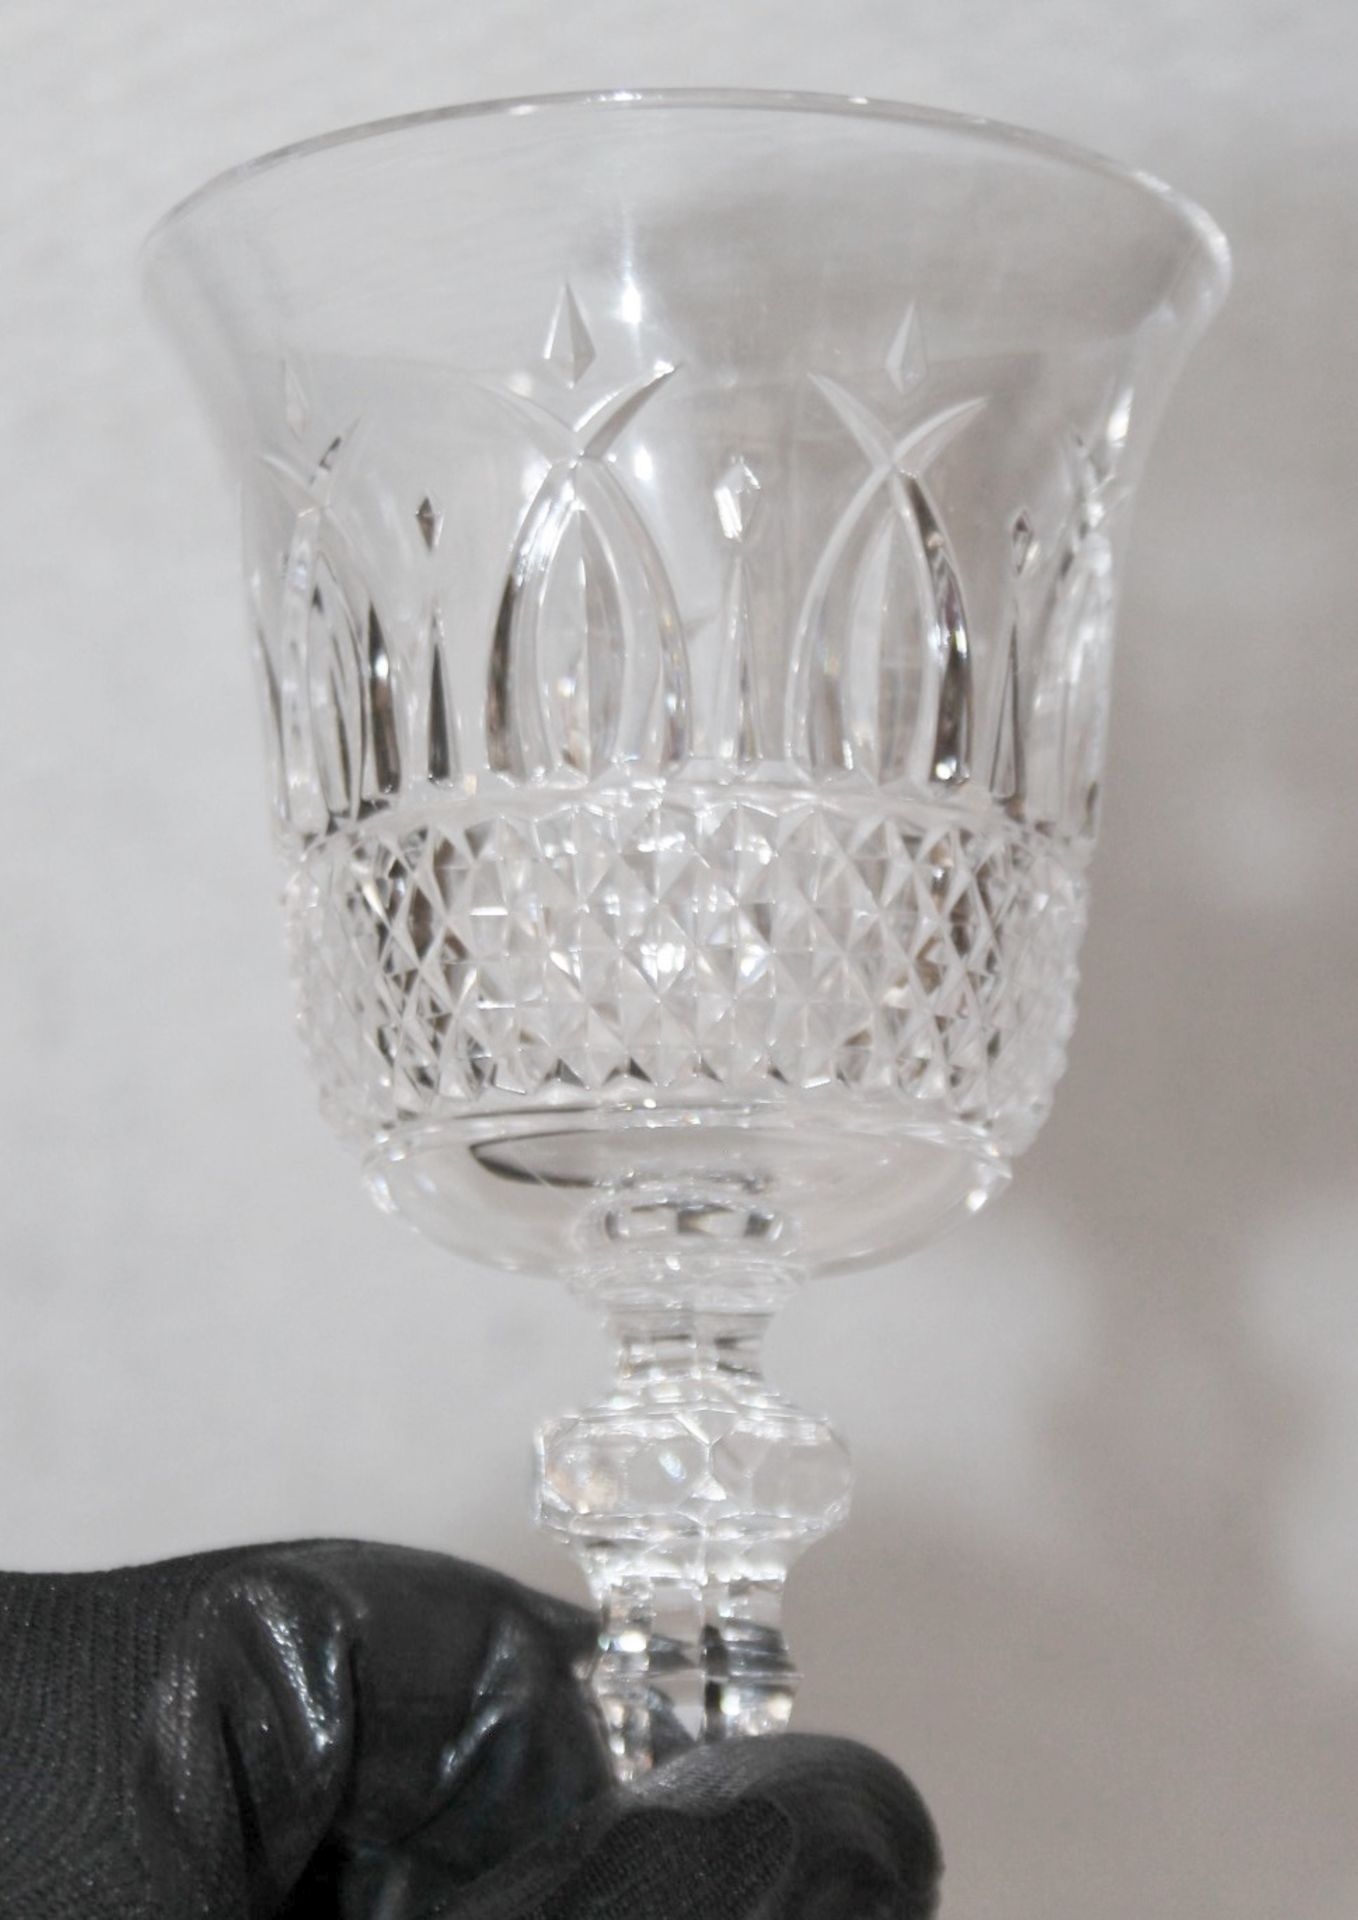 Set of 6 x MARIO LUCA GIUSTI 'Italia' Clear Synthetic Crystal Wine Goblets (180ml) - RRP £144.00 - Image 10 of 13